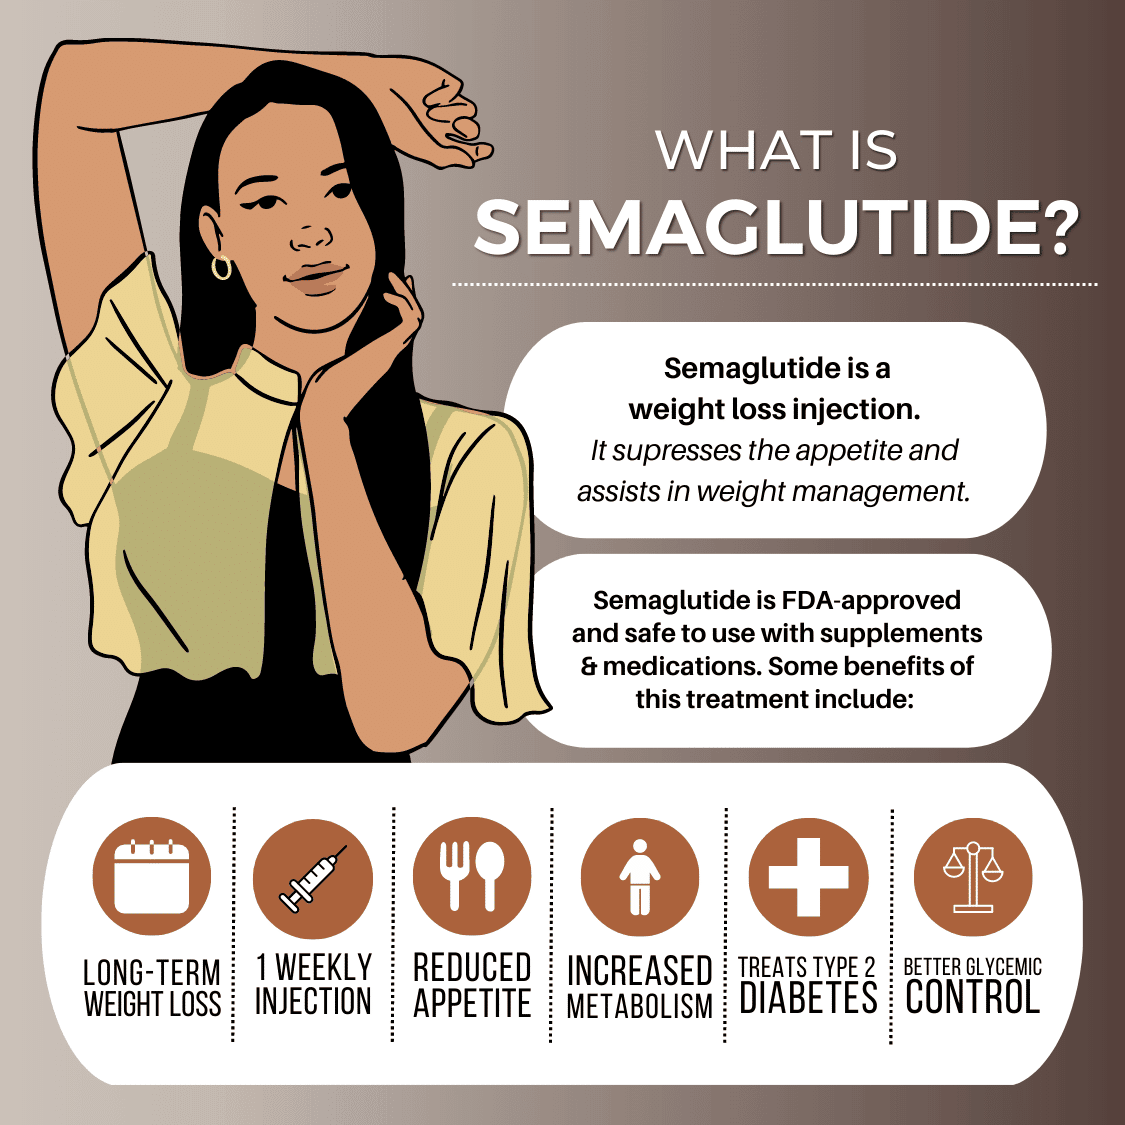 What is semaglutide injection